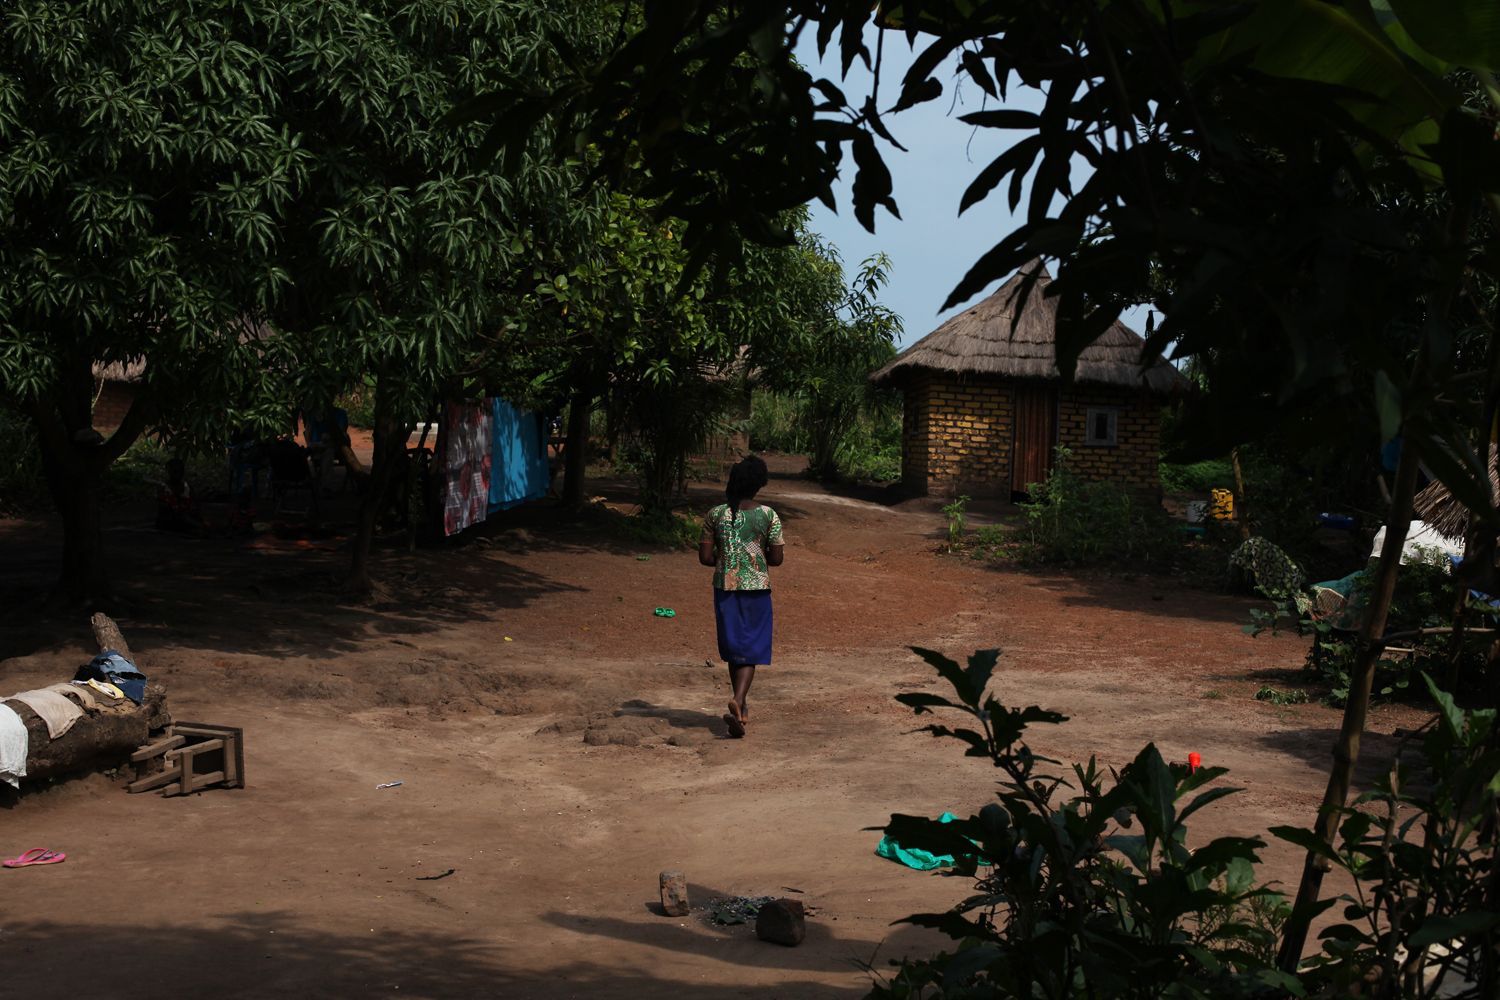 A 17-year-old mother, released by militia forces, walks around the compound where she lives with her two sisters. Like her, and like her grandmother, they were kidnapped and held by rebel soldiers. The girl was pregnant when she was released. Image by Andreea Campeanu. South Sudan, 2018.